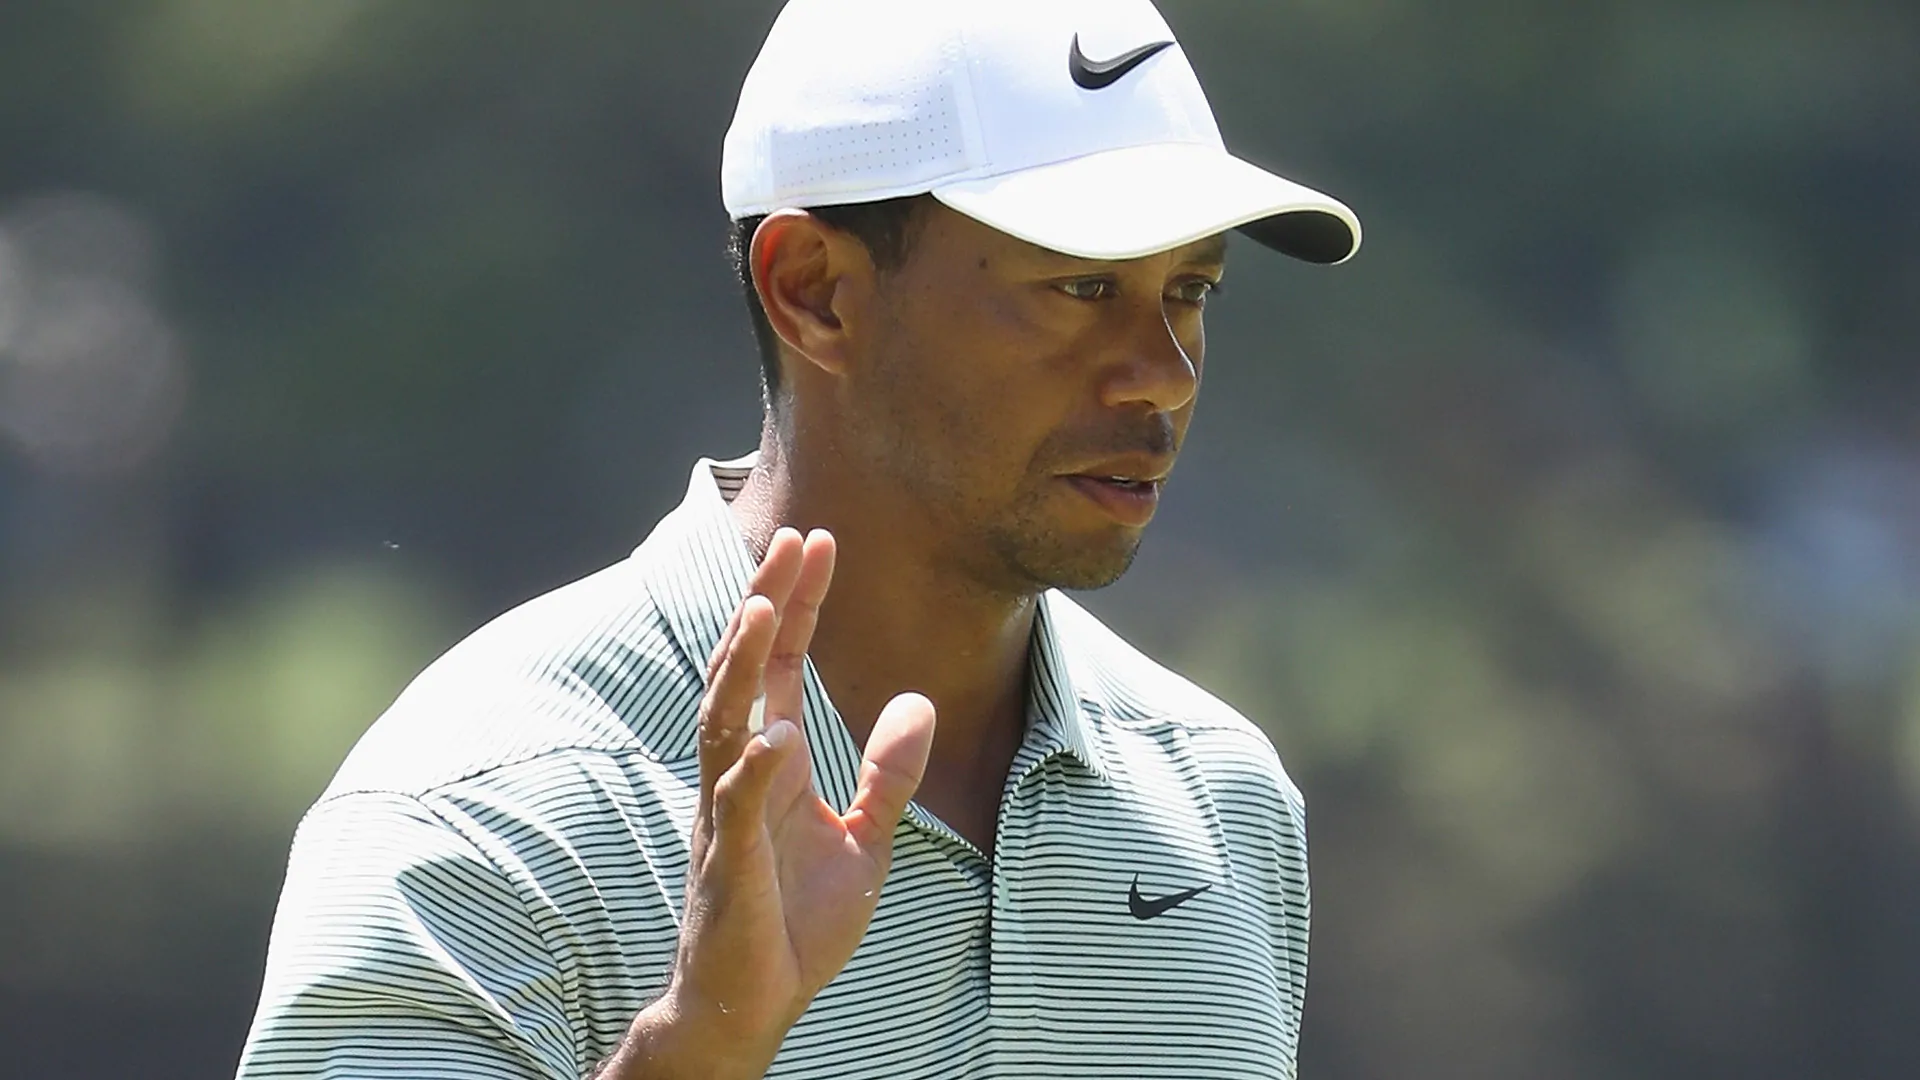 Watch: Tiger highlights from Rd. 3 of the PGA